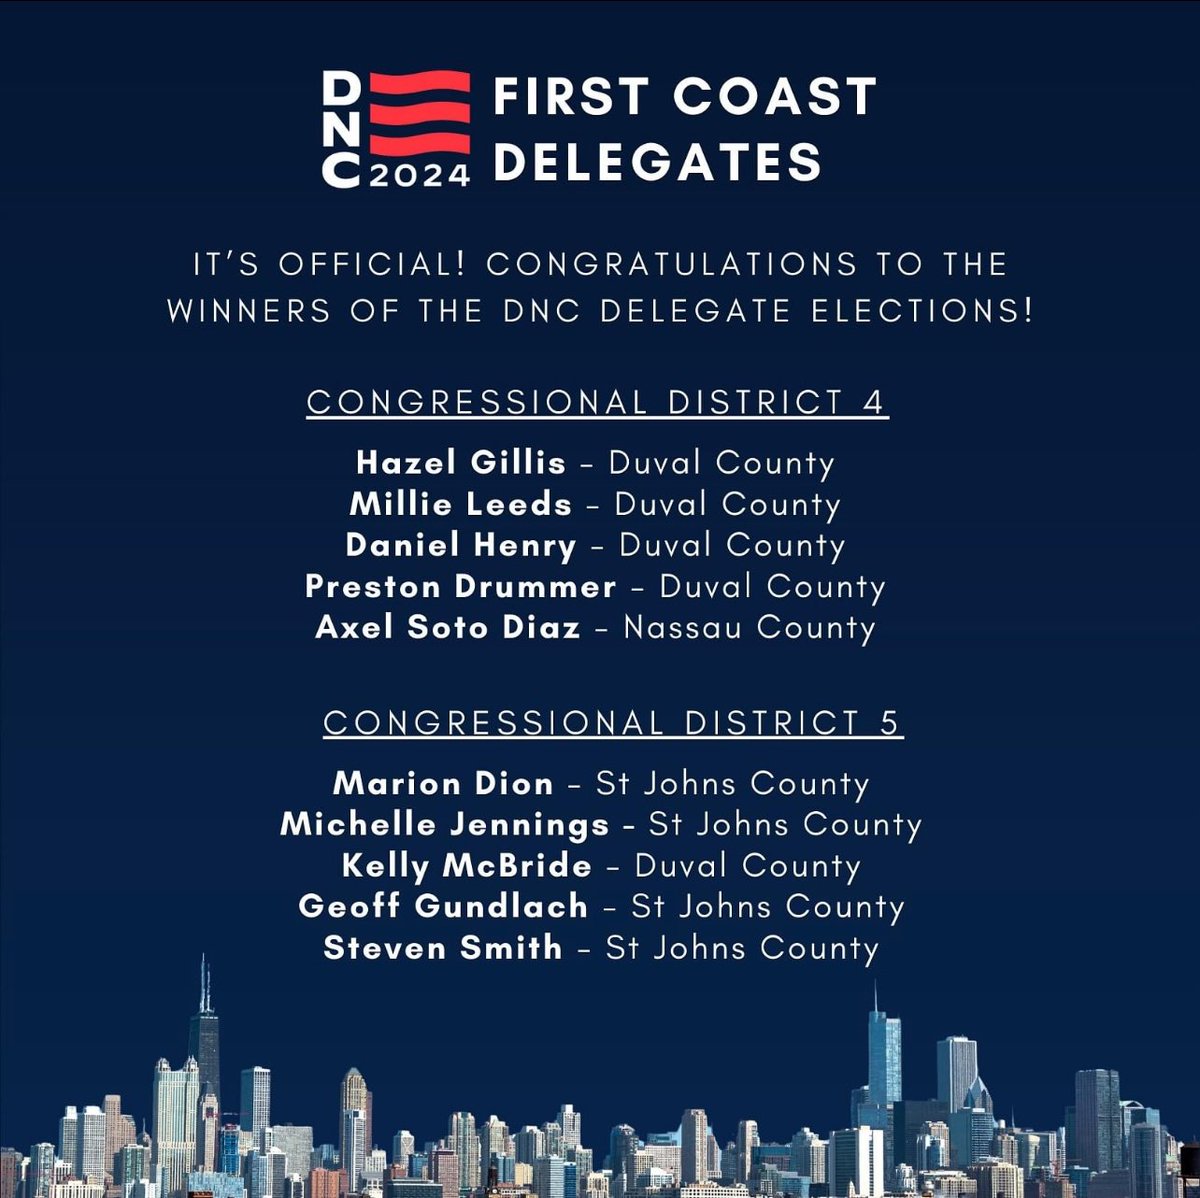 Congratulations to everyone who got elected to be a delegate for Congressional Districts 4 & 5! 🎉 We cannot wait to see the amazing work you'll do!💙🇺🇸